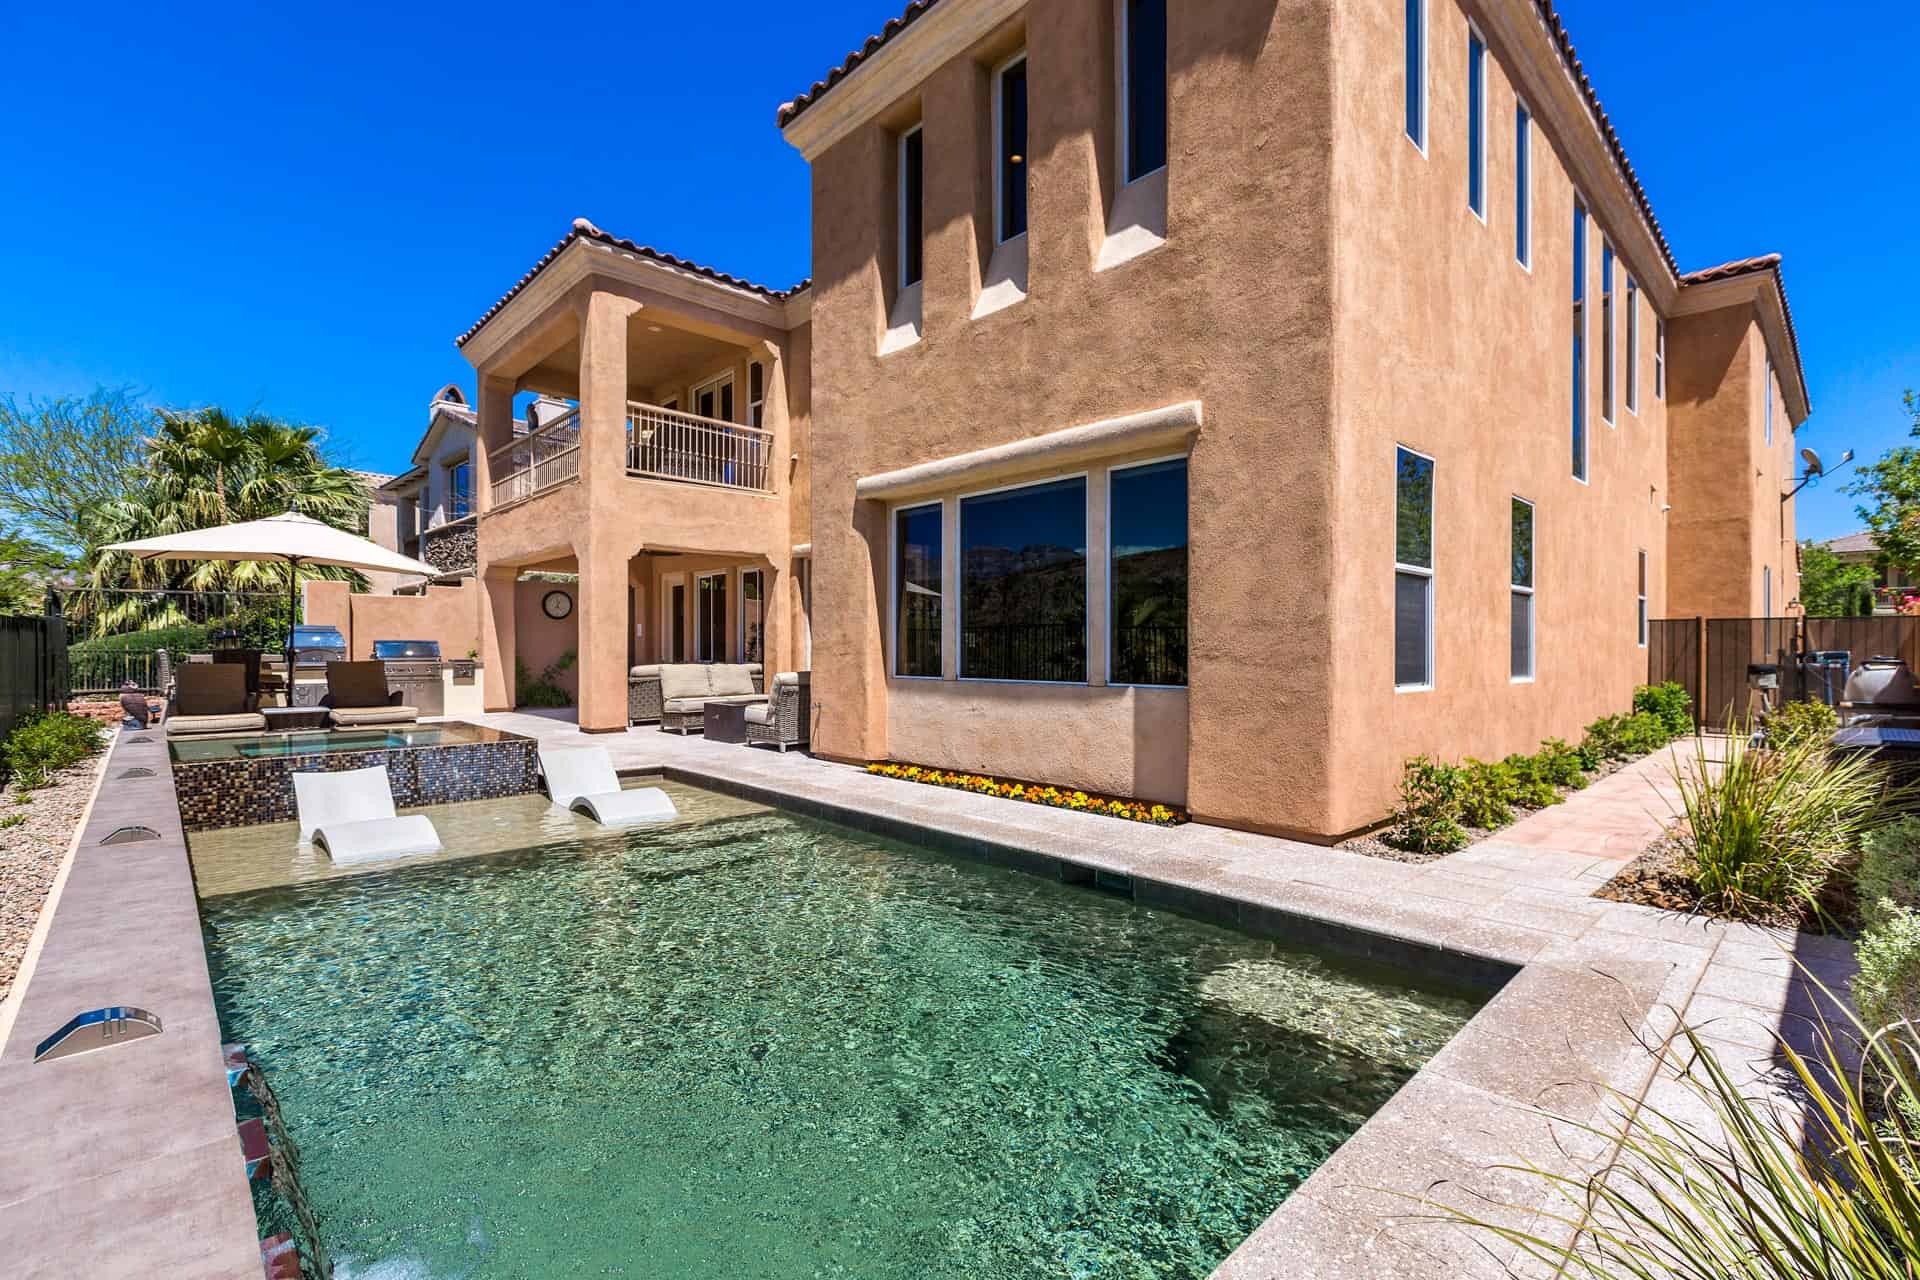 las-vegas-luxry-real-estate-realtor-rob-jensen-company-2615-grassy-spring-place-red-rock-country-club58